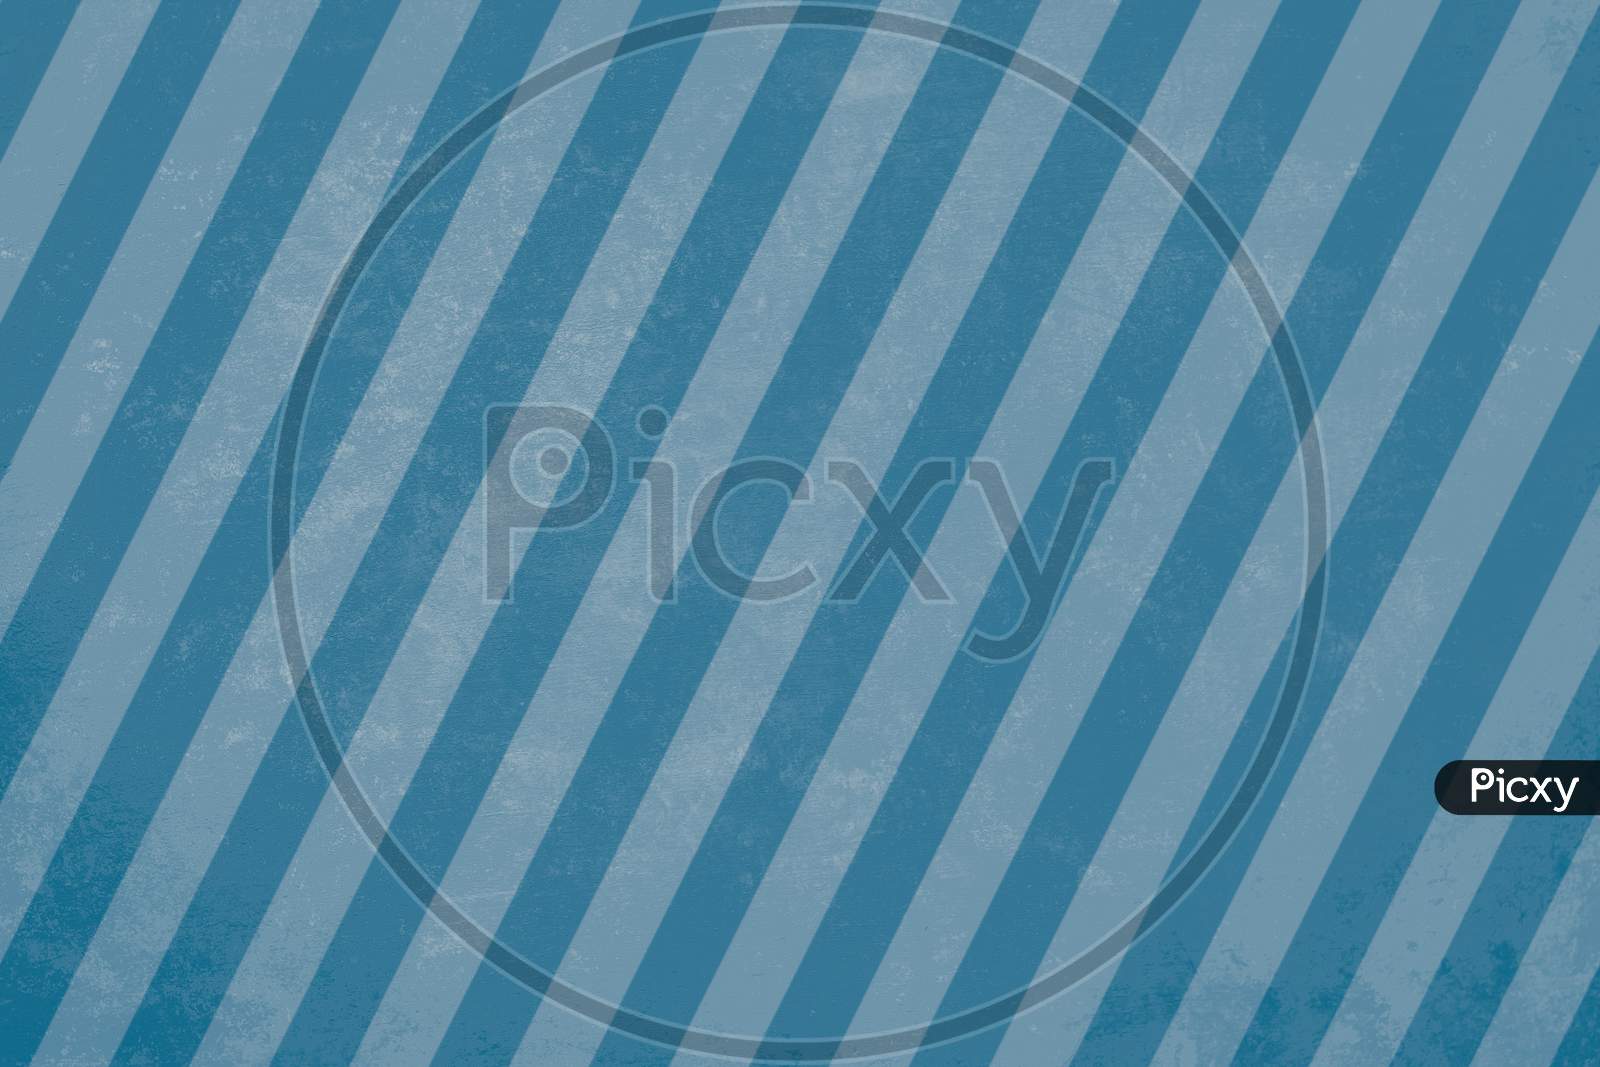 background. Striped diagonal pattern  illustration of Background with graphics design